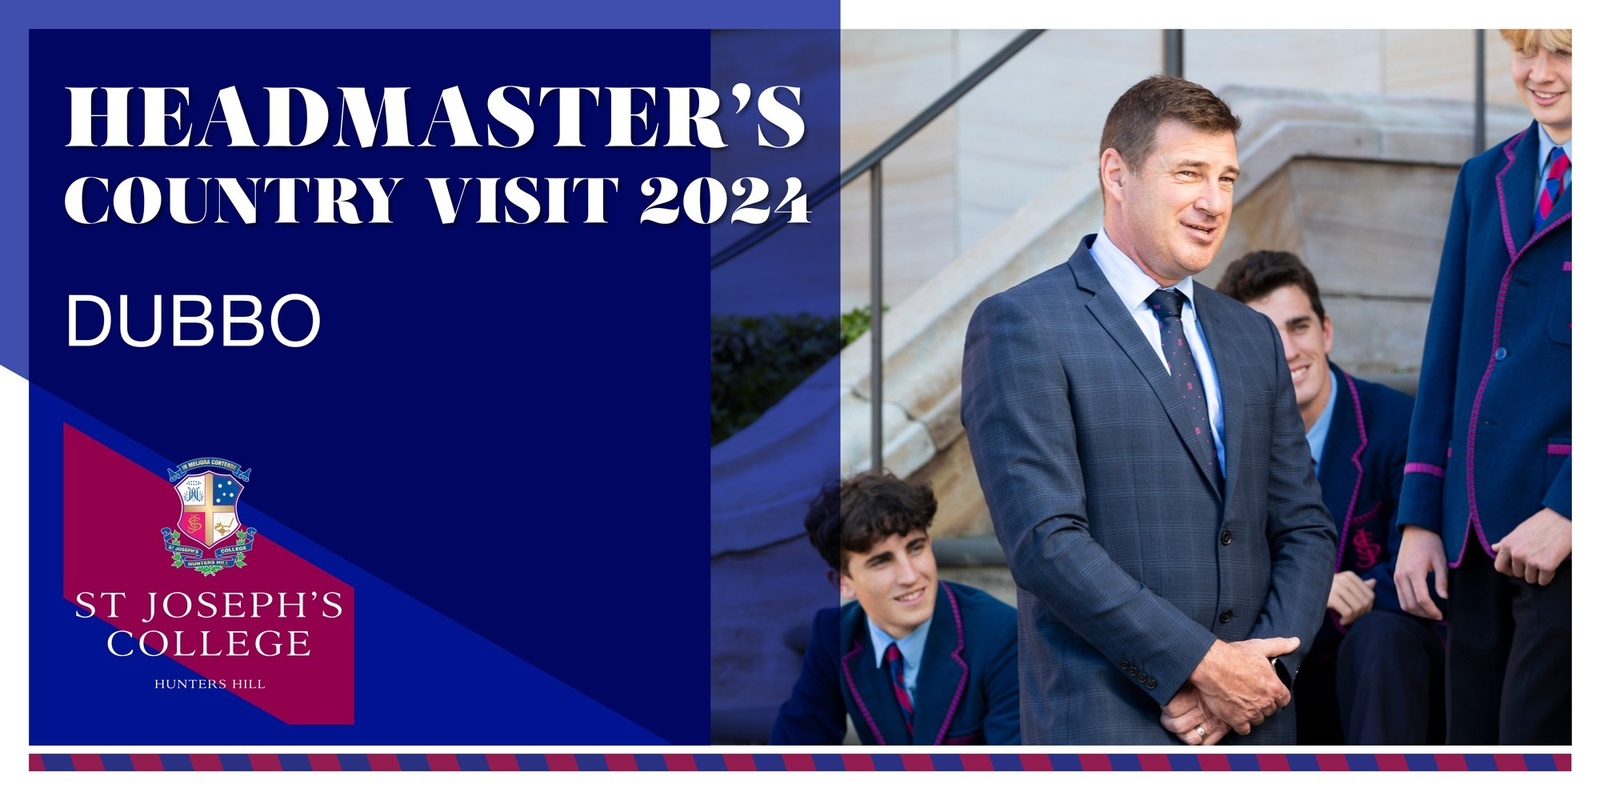 Banner image for 2024 Headmaster's Dubbo Country Visit